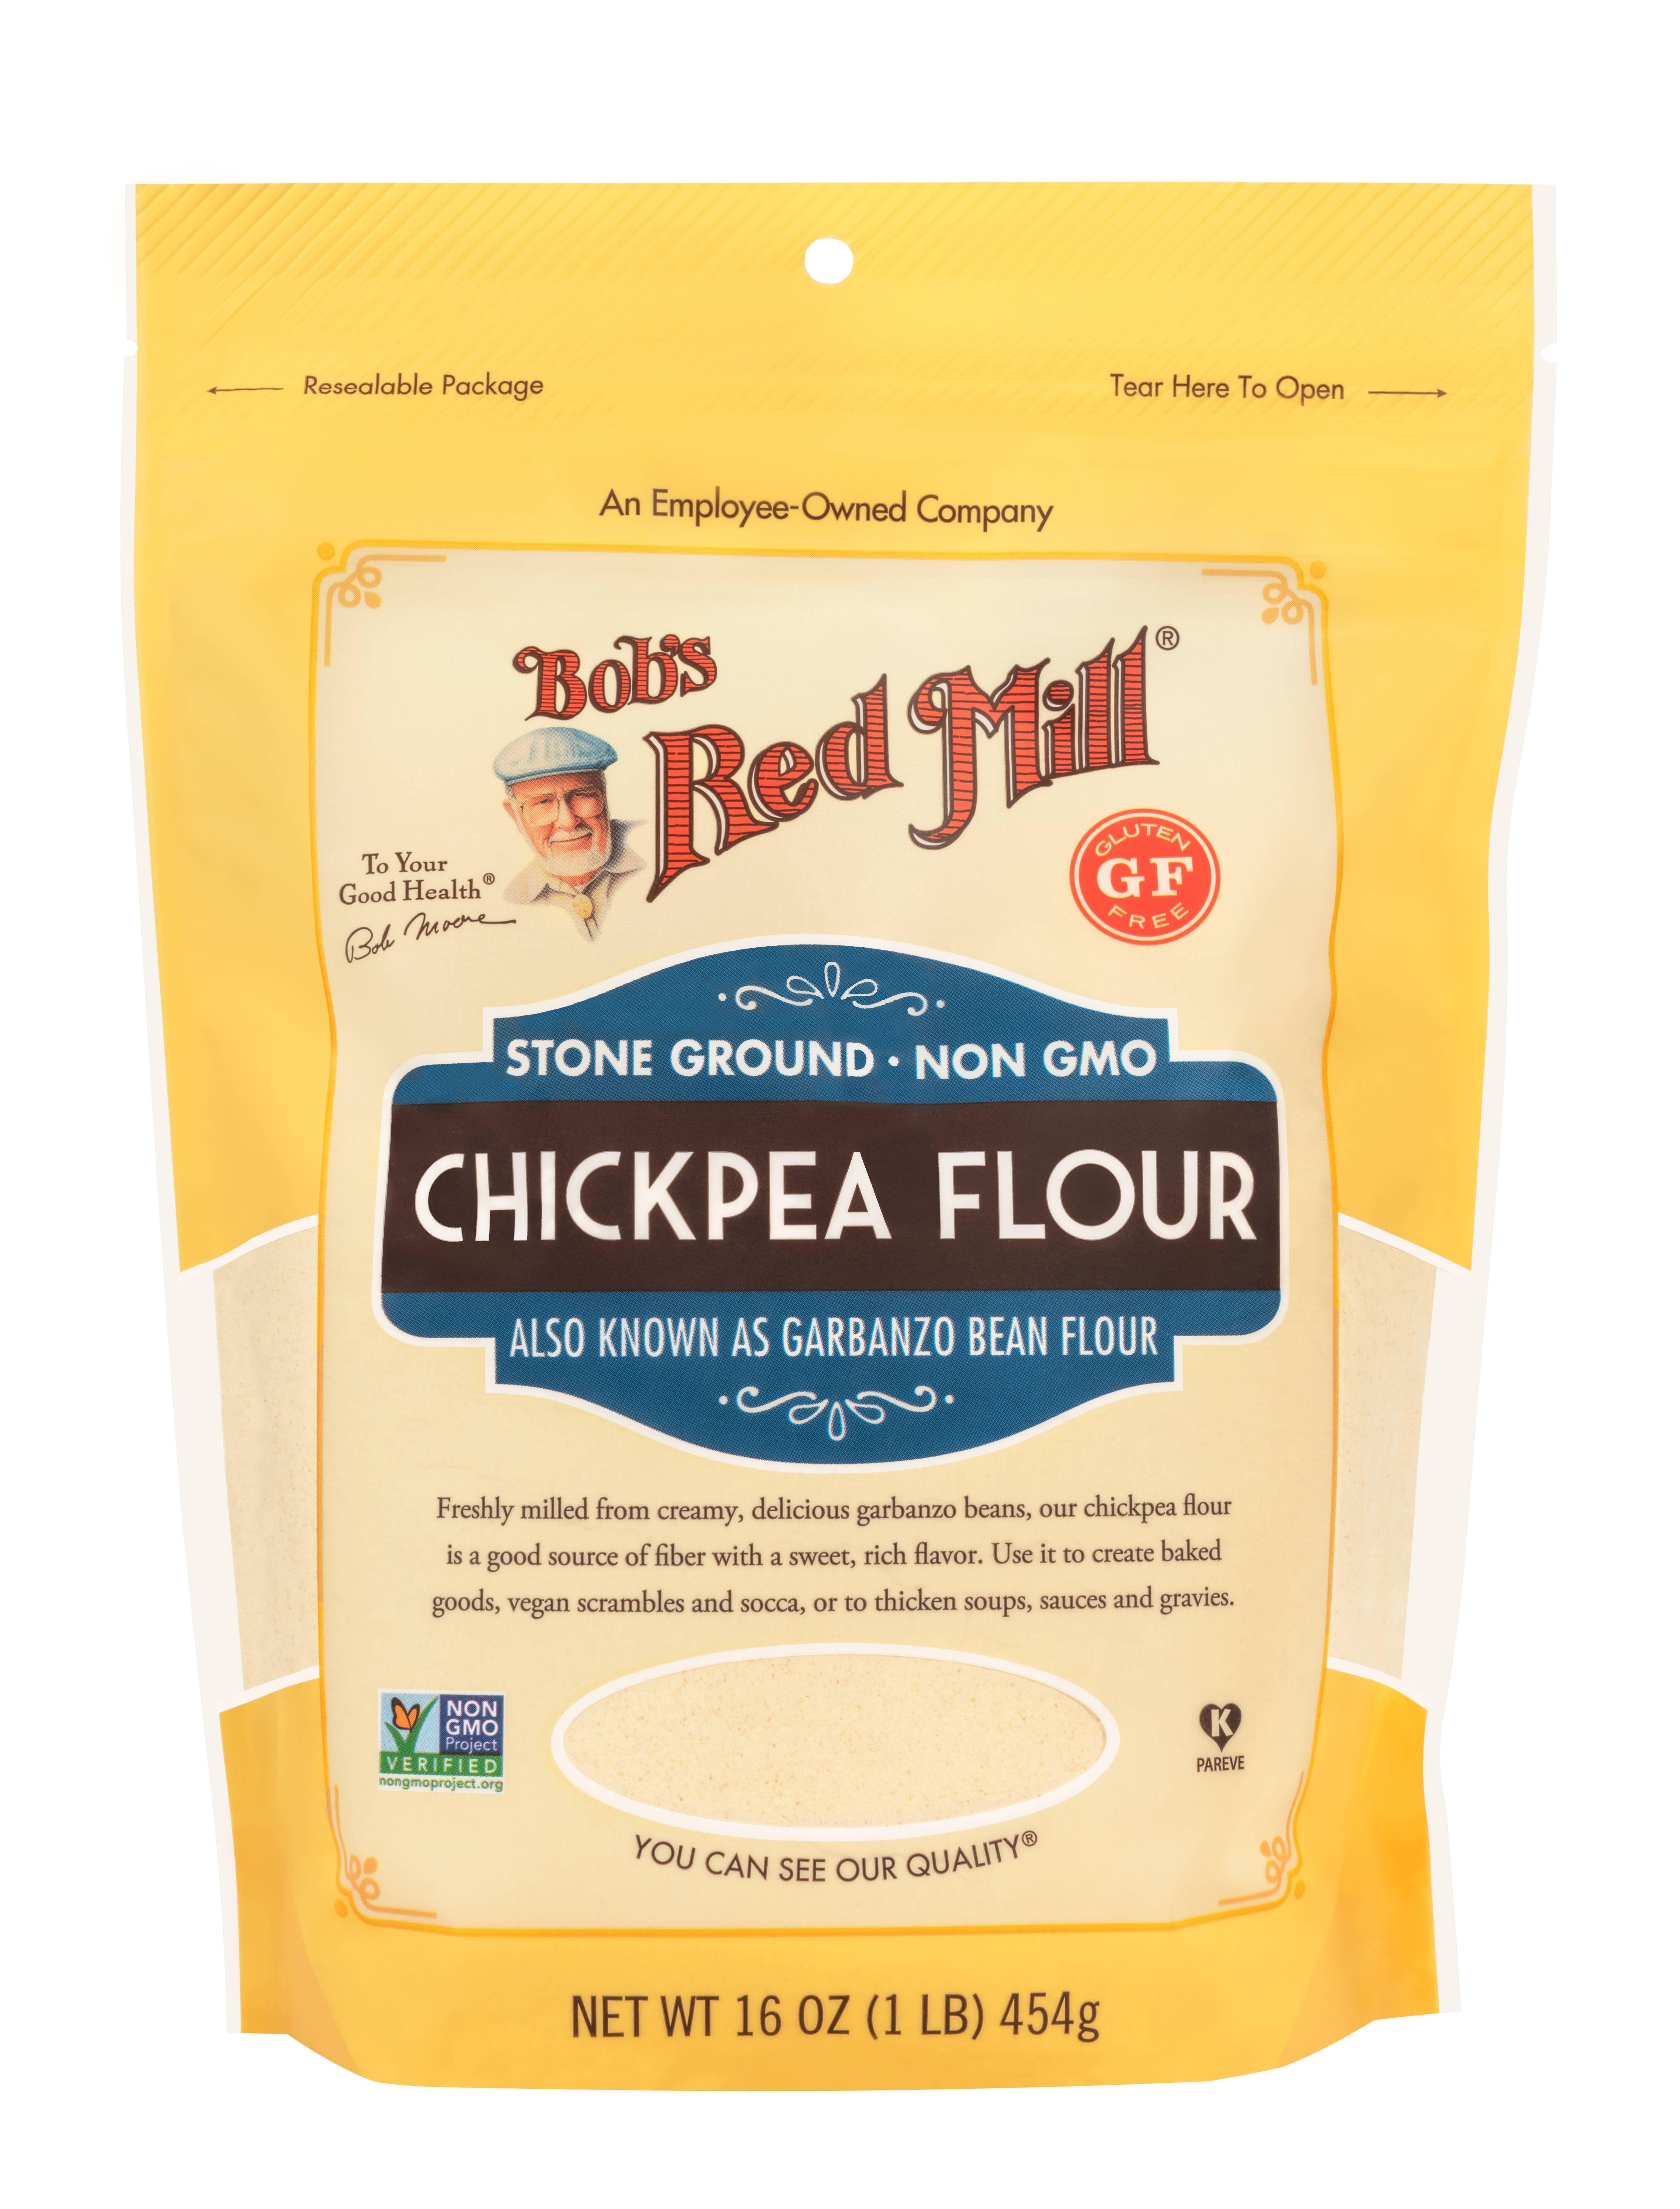 Bob's Red Mill Chickpea Flour 16 Oz Resealable Pouch